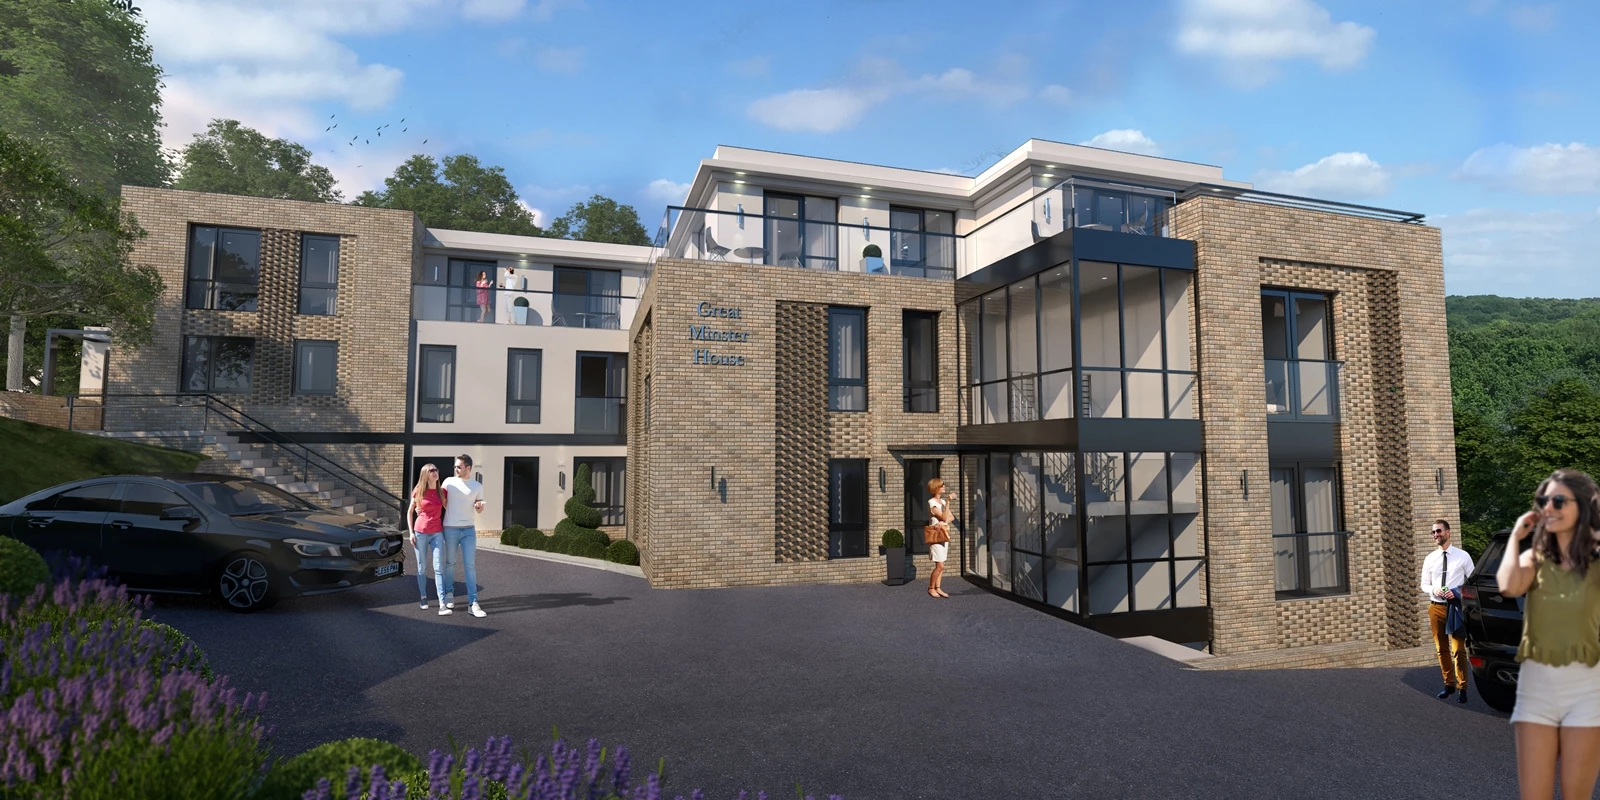 Greatminster House in Horsforth could be given a new lease of life and transformed into a brand-new apartment development